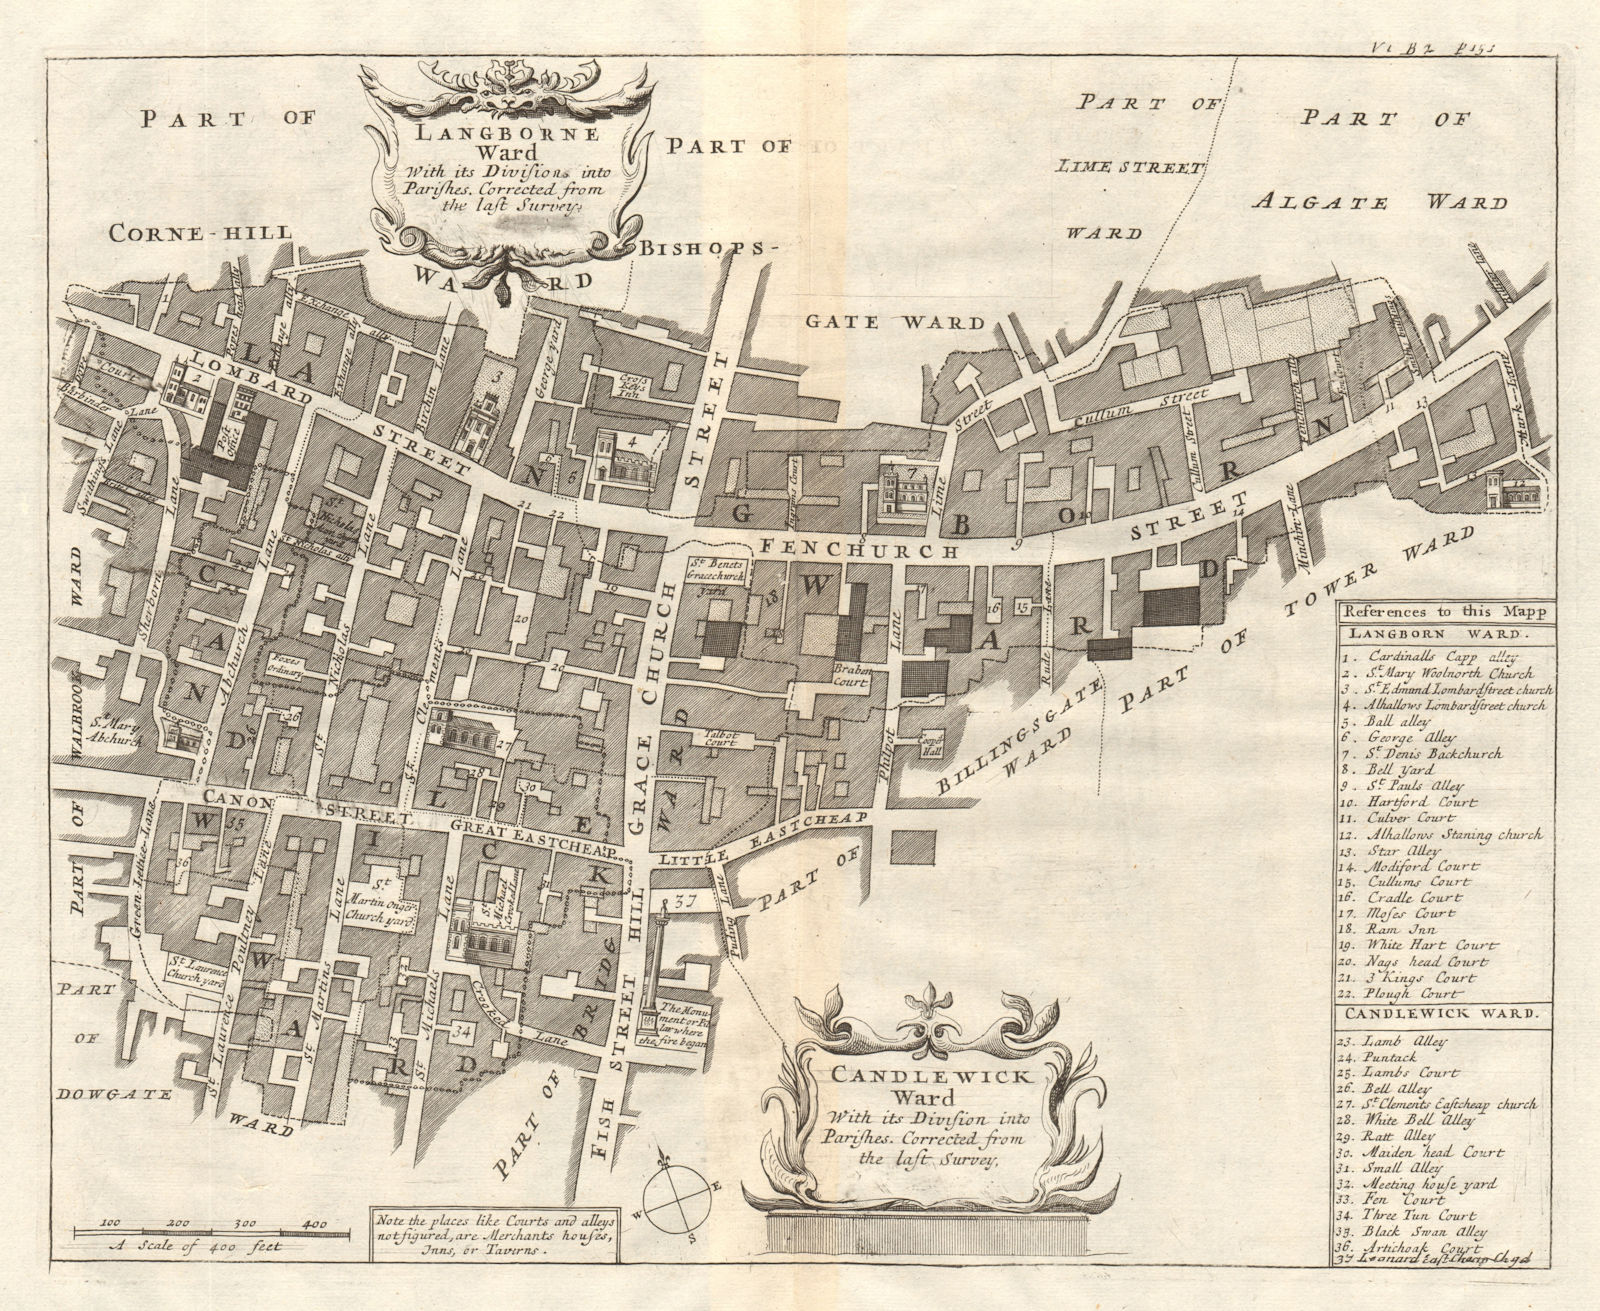 Langborne & Candlewick Wards. Cannon St. City of London. STOW/STRYPE 1720 map